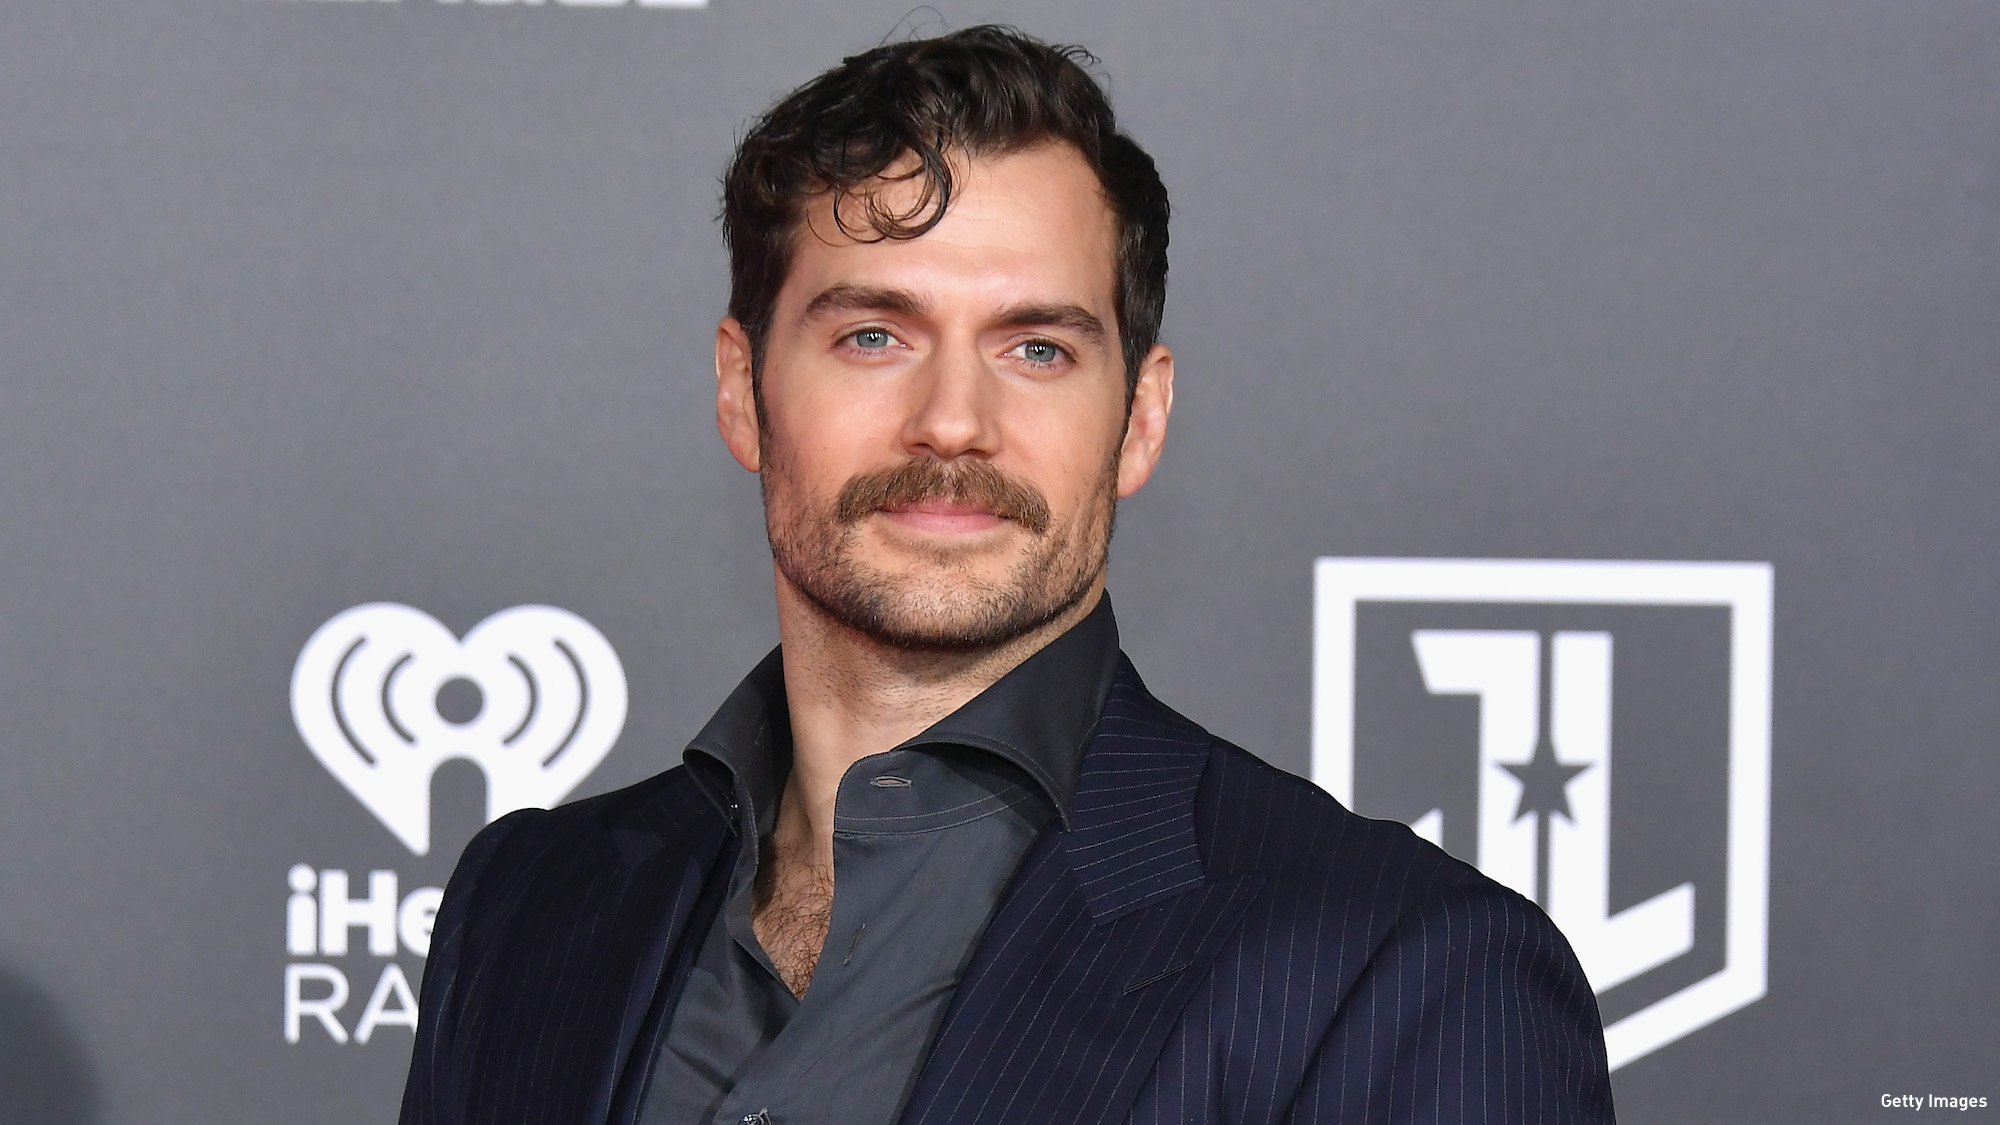 WATCH: Henry Cavill Posts a Moving Tribute to His Mustache | Anglophenia | BBC America